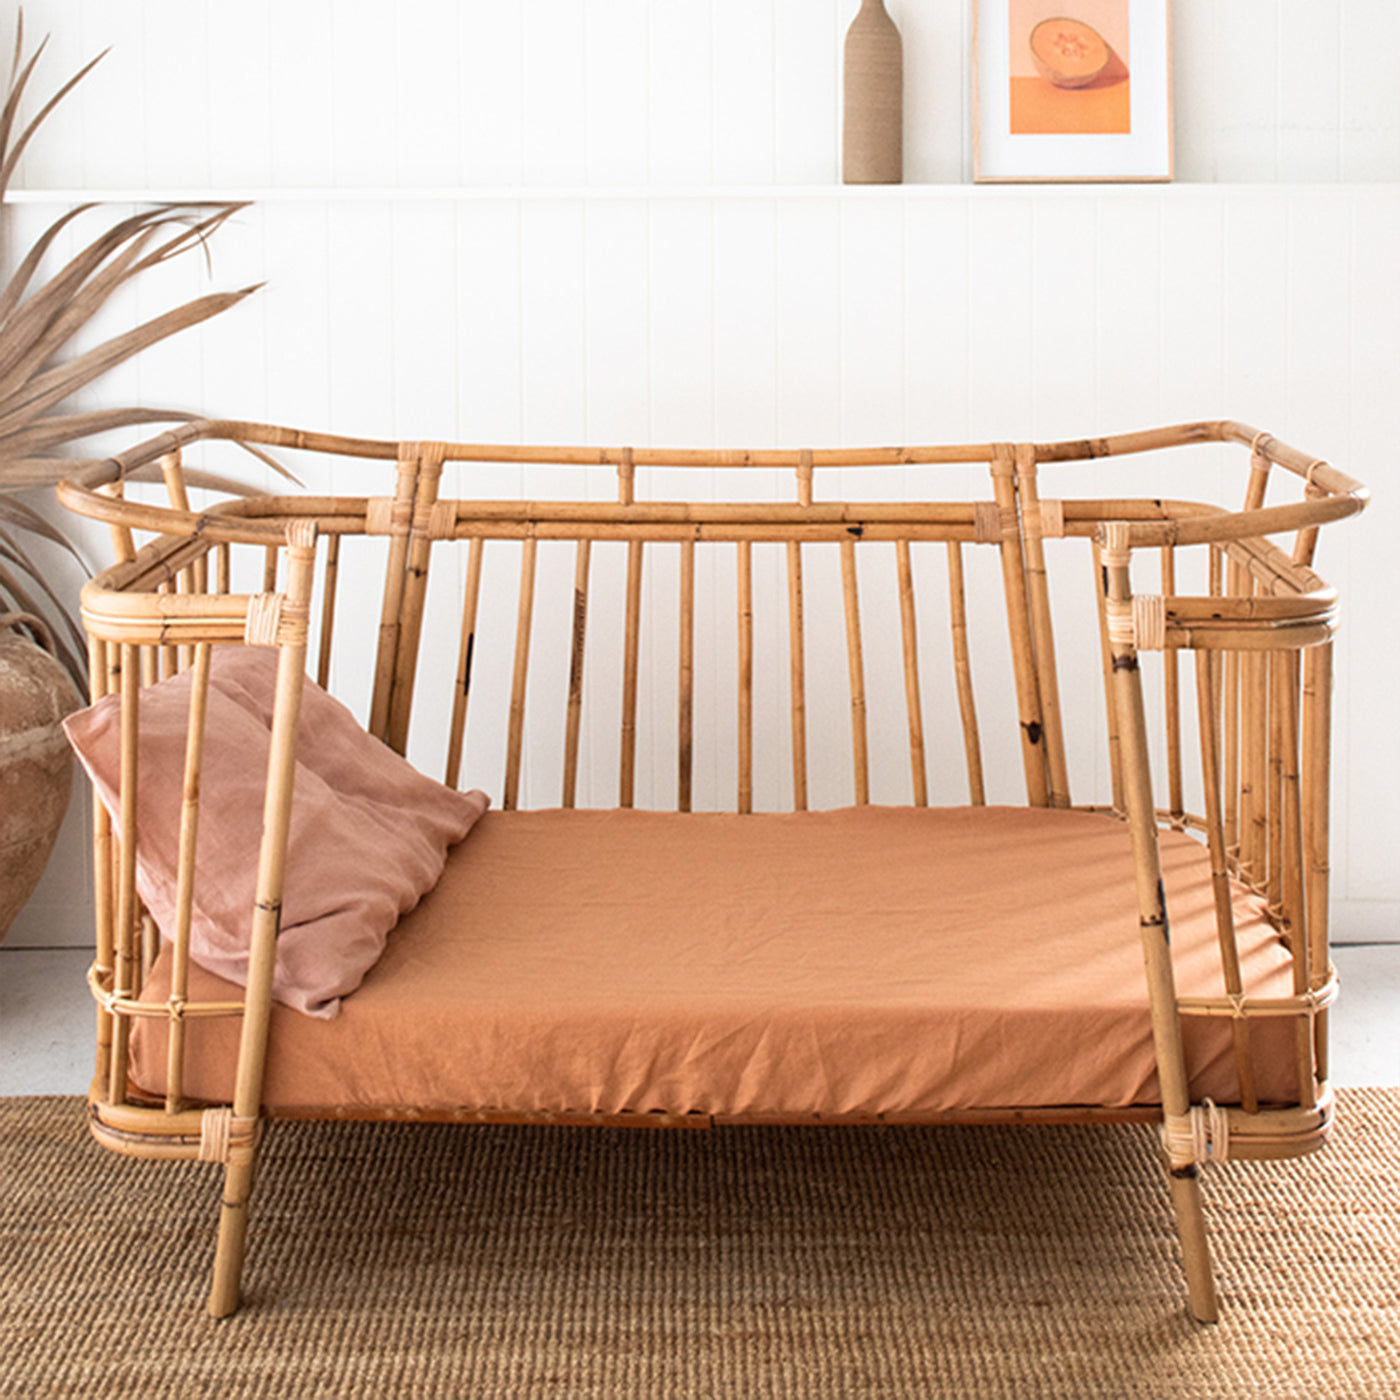 French Flax Linen Cot Sheet in Sandalwood